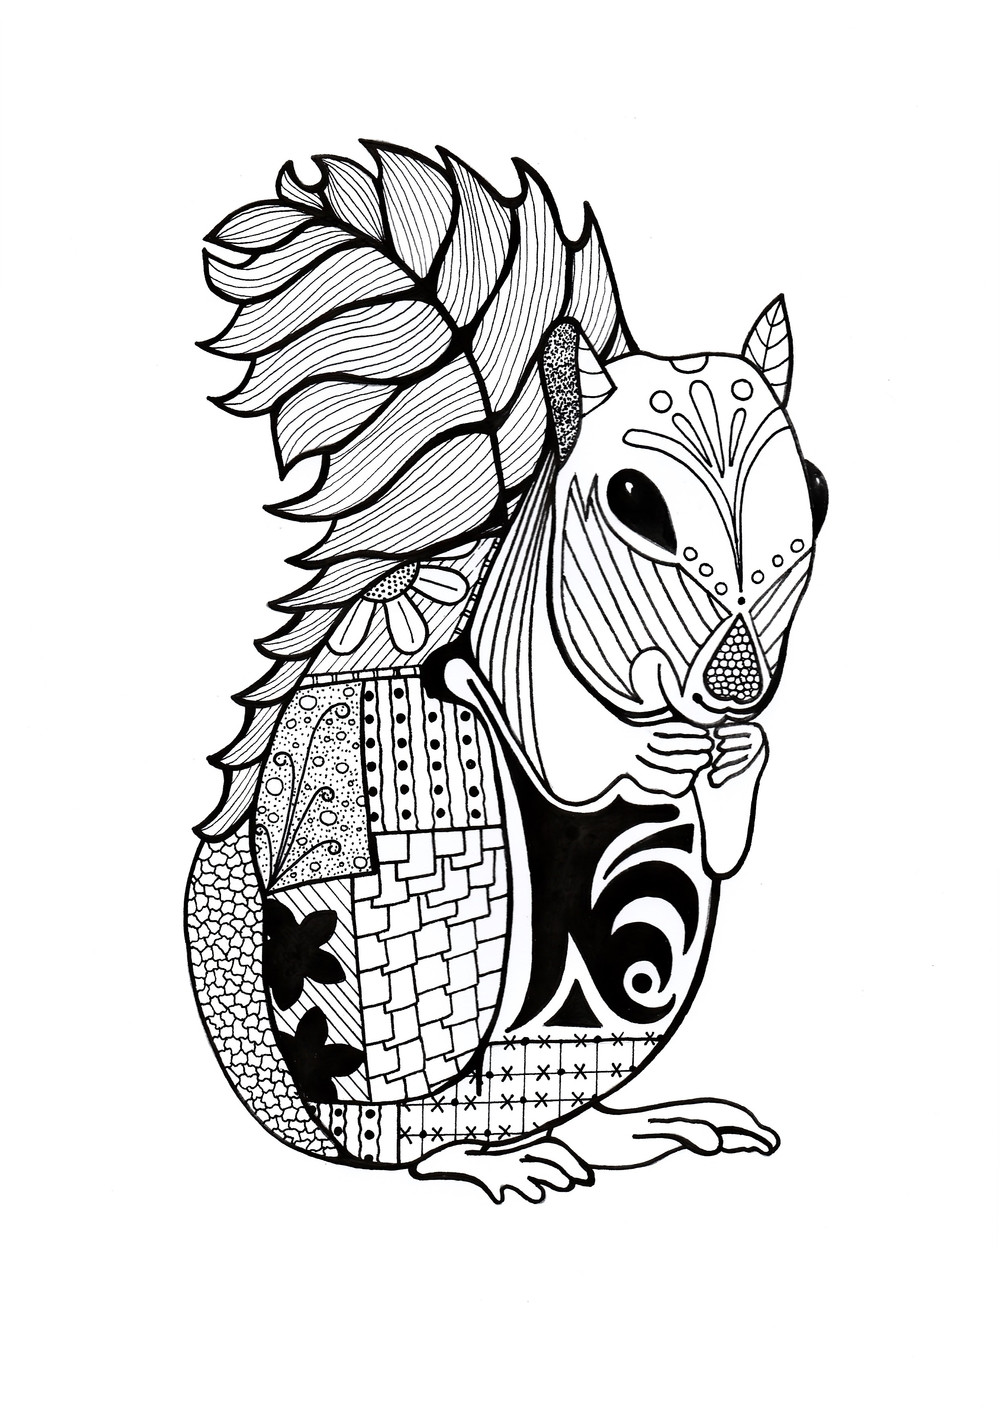 Animal Coloring Pages For Adults
 Intricate Squirrel Adult Coloring Page